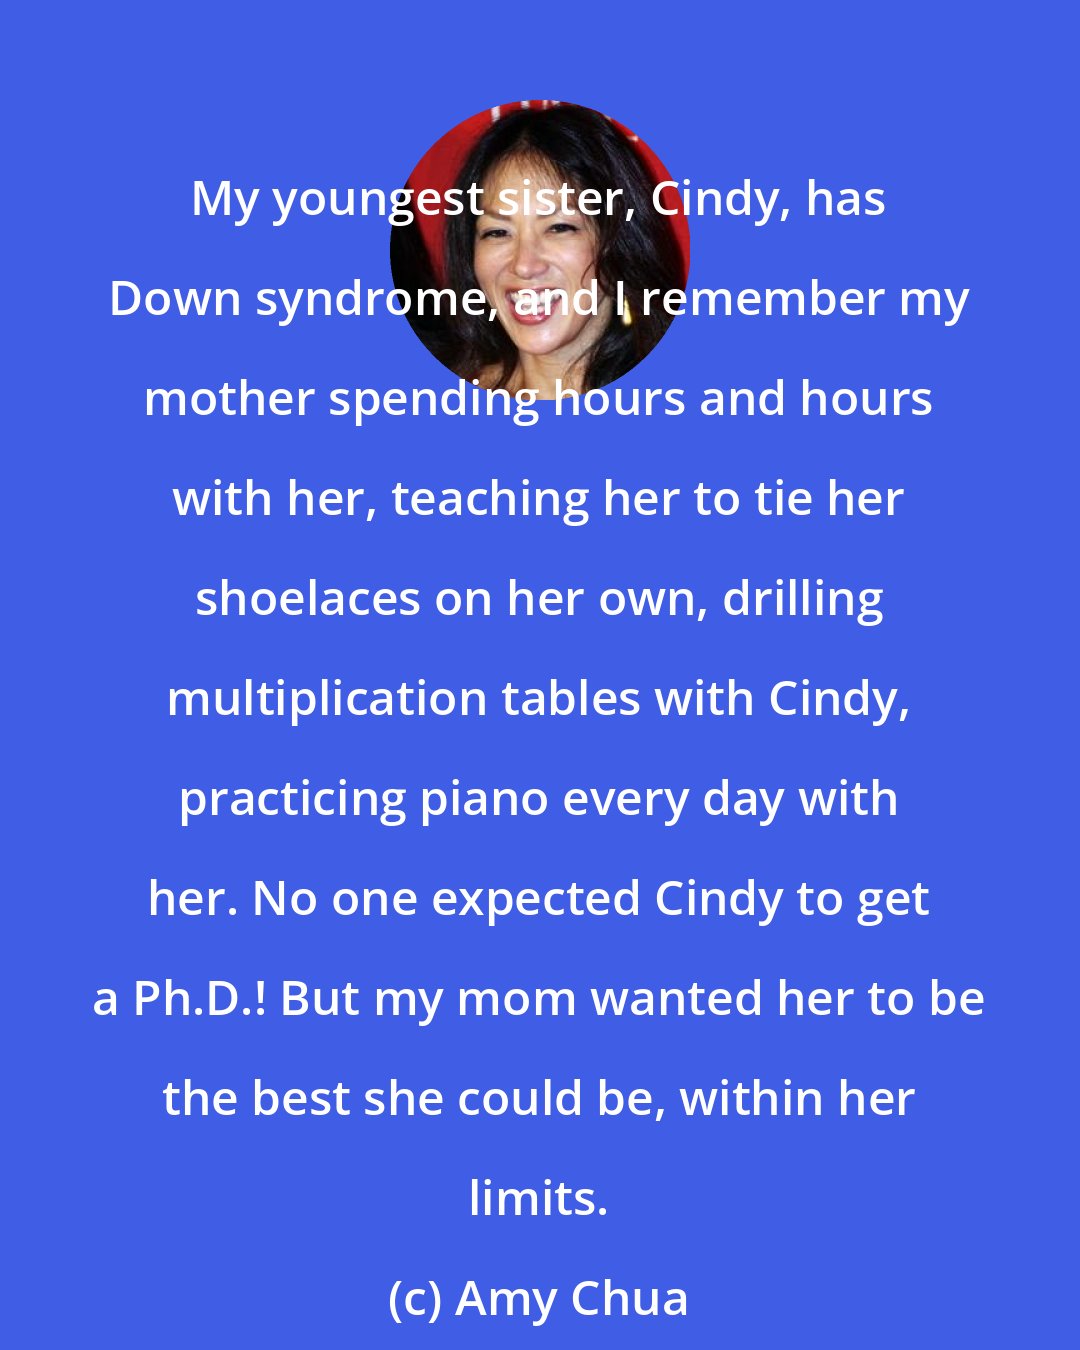 Amy Chua: My youngest sister, Cindy, has Down syndrome, and I remember my mother spending hours and hours with her, teaching her to tie her shoelaces on her own, drilling multiplication tables with Cindy, practicing piano every day with her. No one expected Cindy to get a Ph.D.! But my mom wanted her to be the best she could be, within her limits.